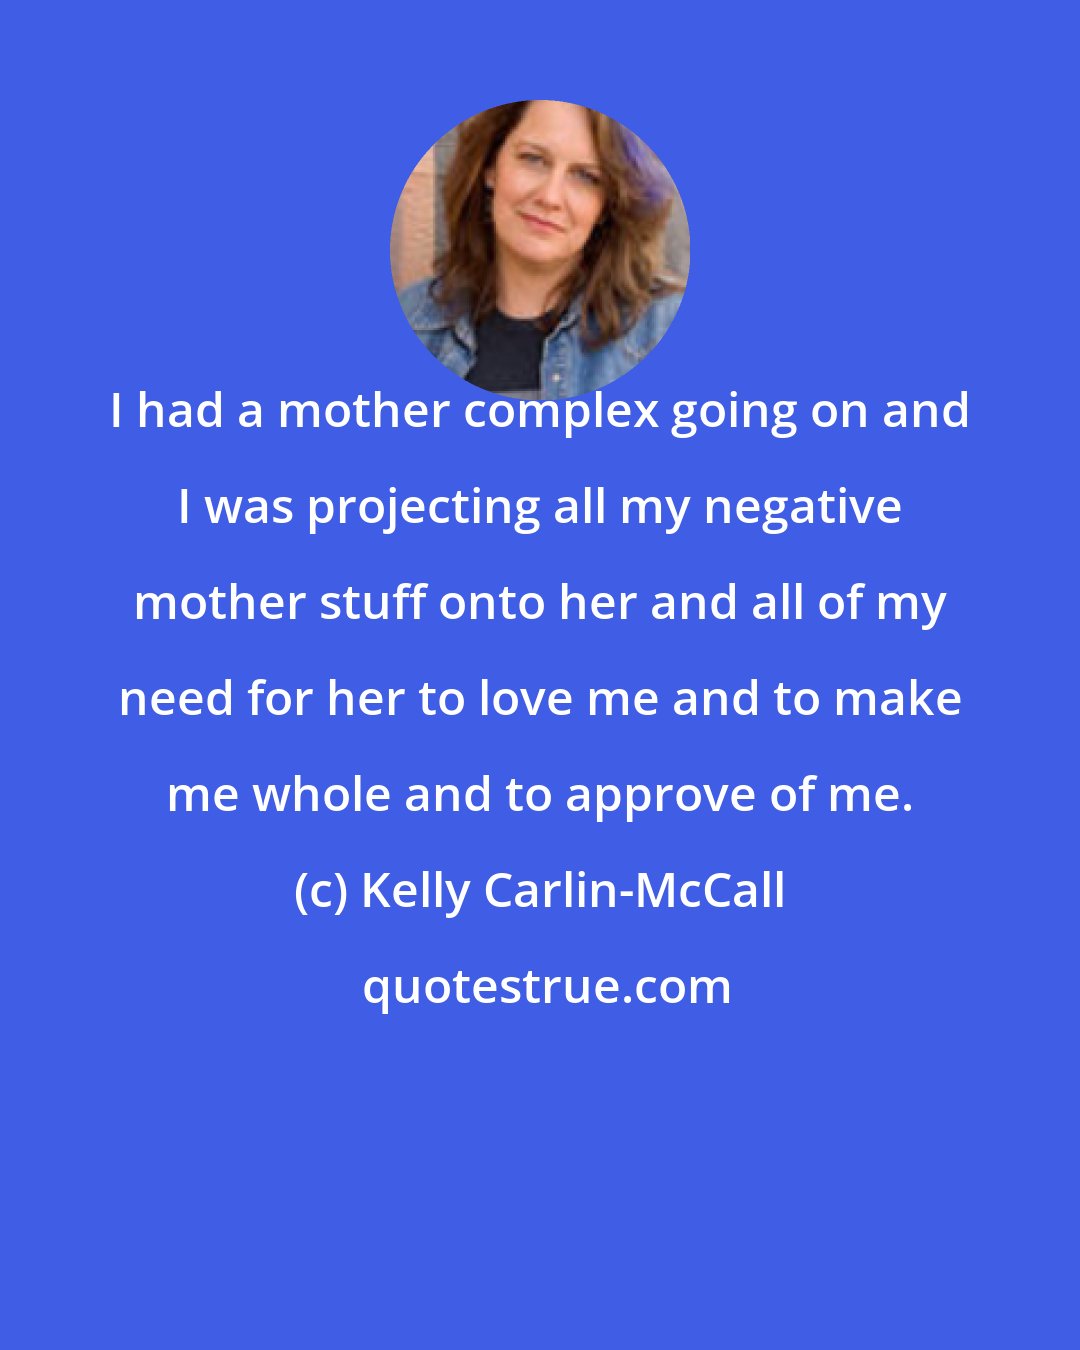 Kelly Carlin-McCall: I had a mother complex going on and I was projecting all my negative mother stuff onto her and all of my need for her to love me and to make me whole and to approve of me.